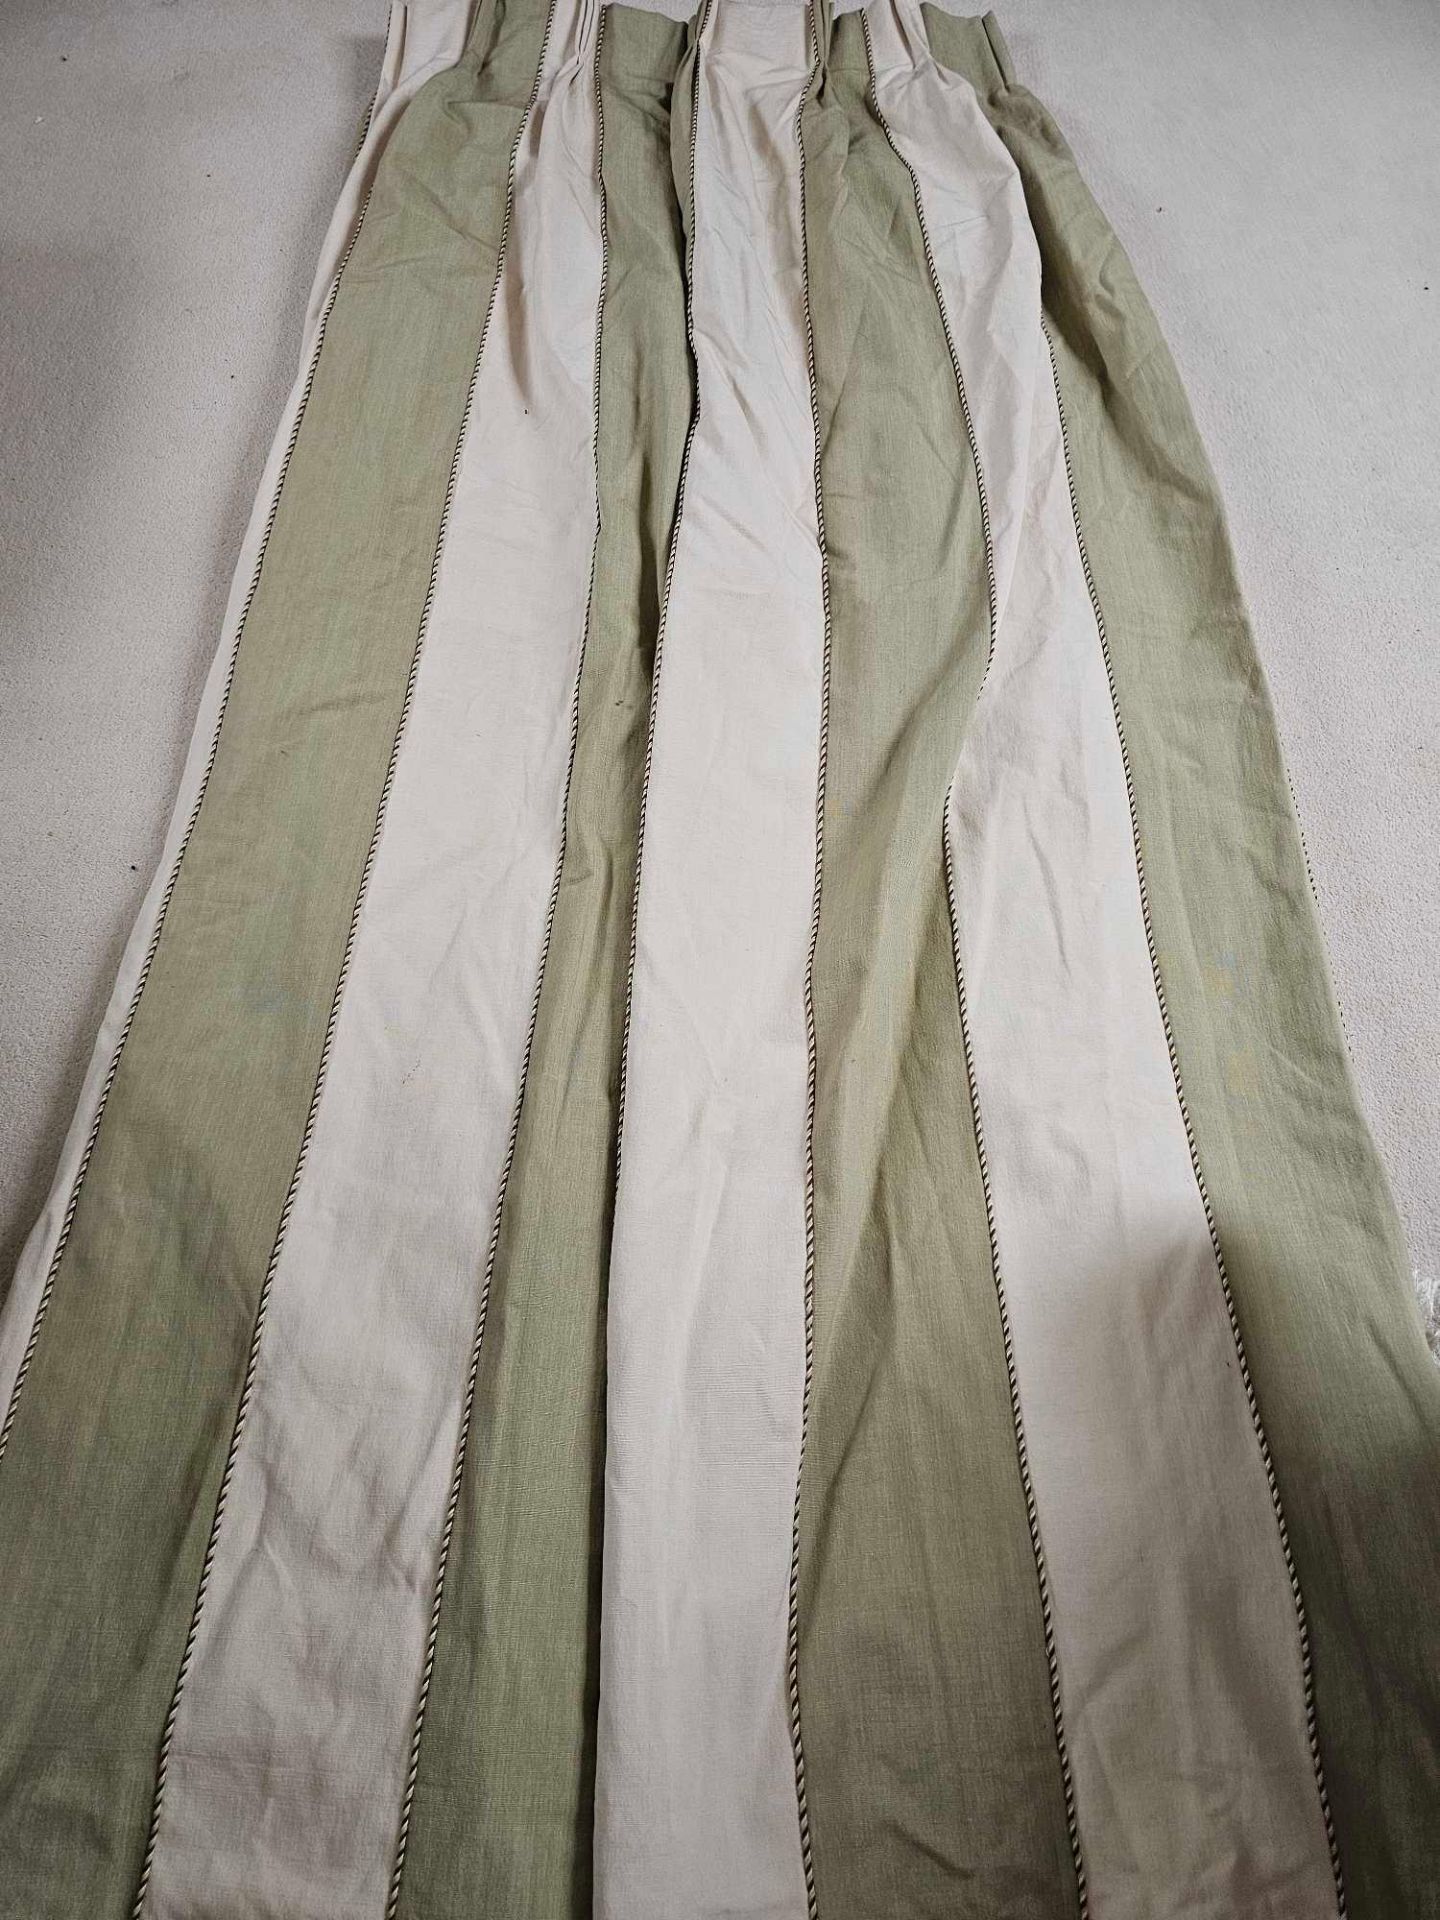 2 X Pairs Of Green And Cream Lined Drapes Each Panel 140 X 210cm Drop - Image 3 of 3